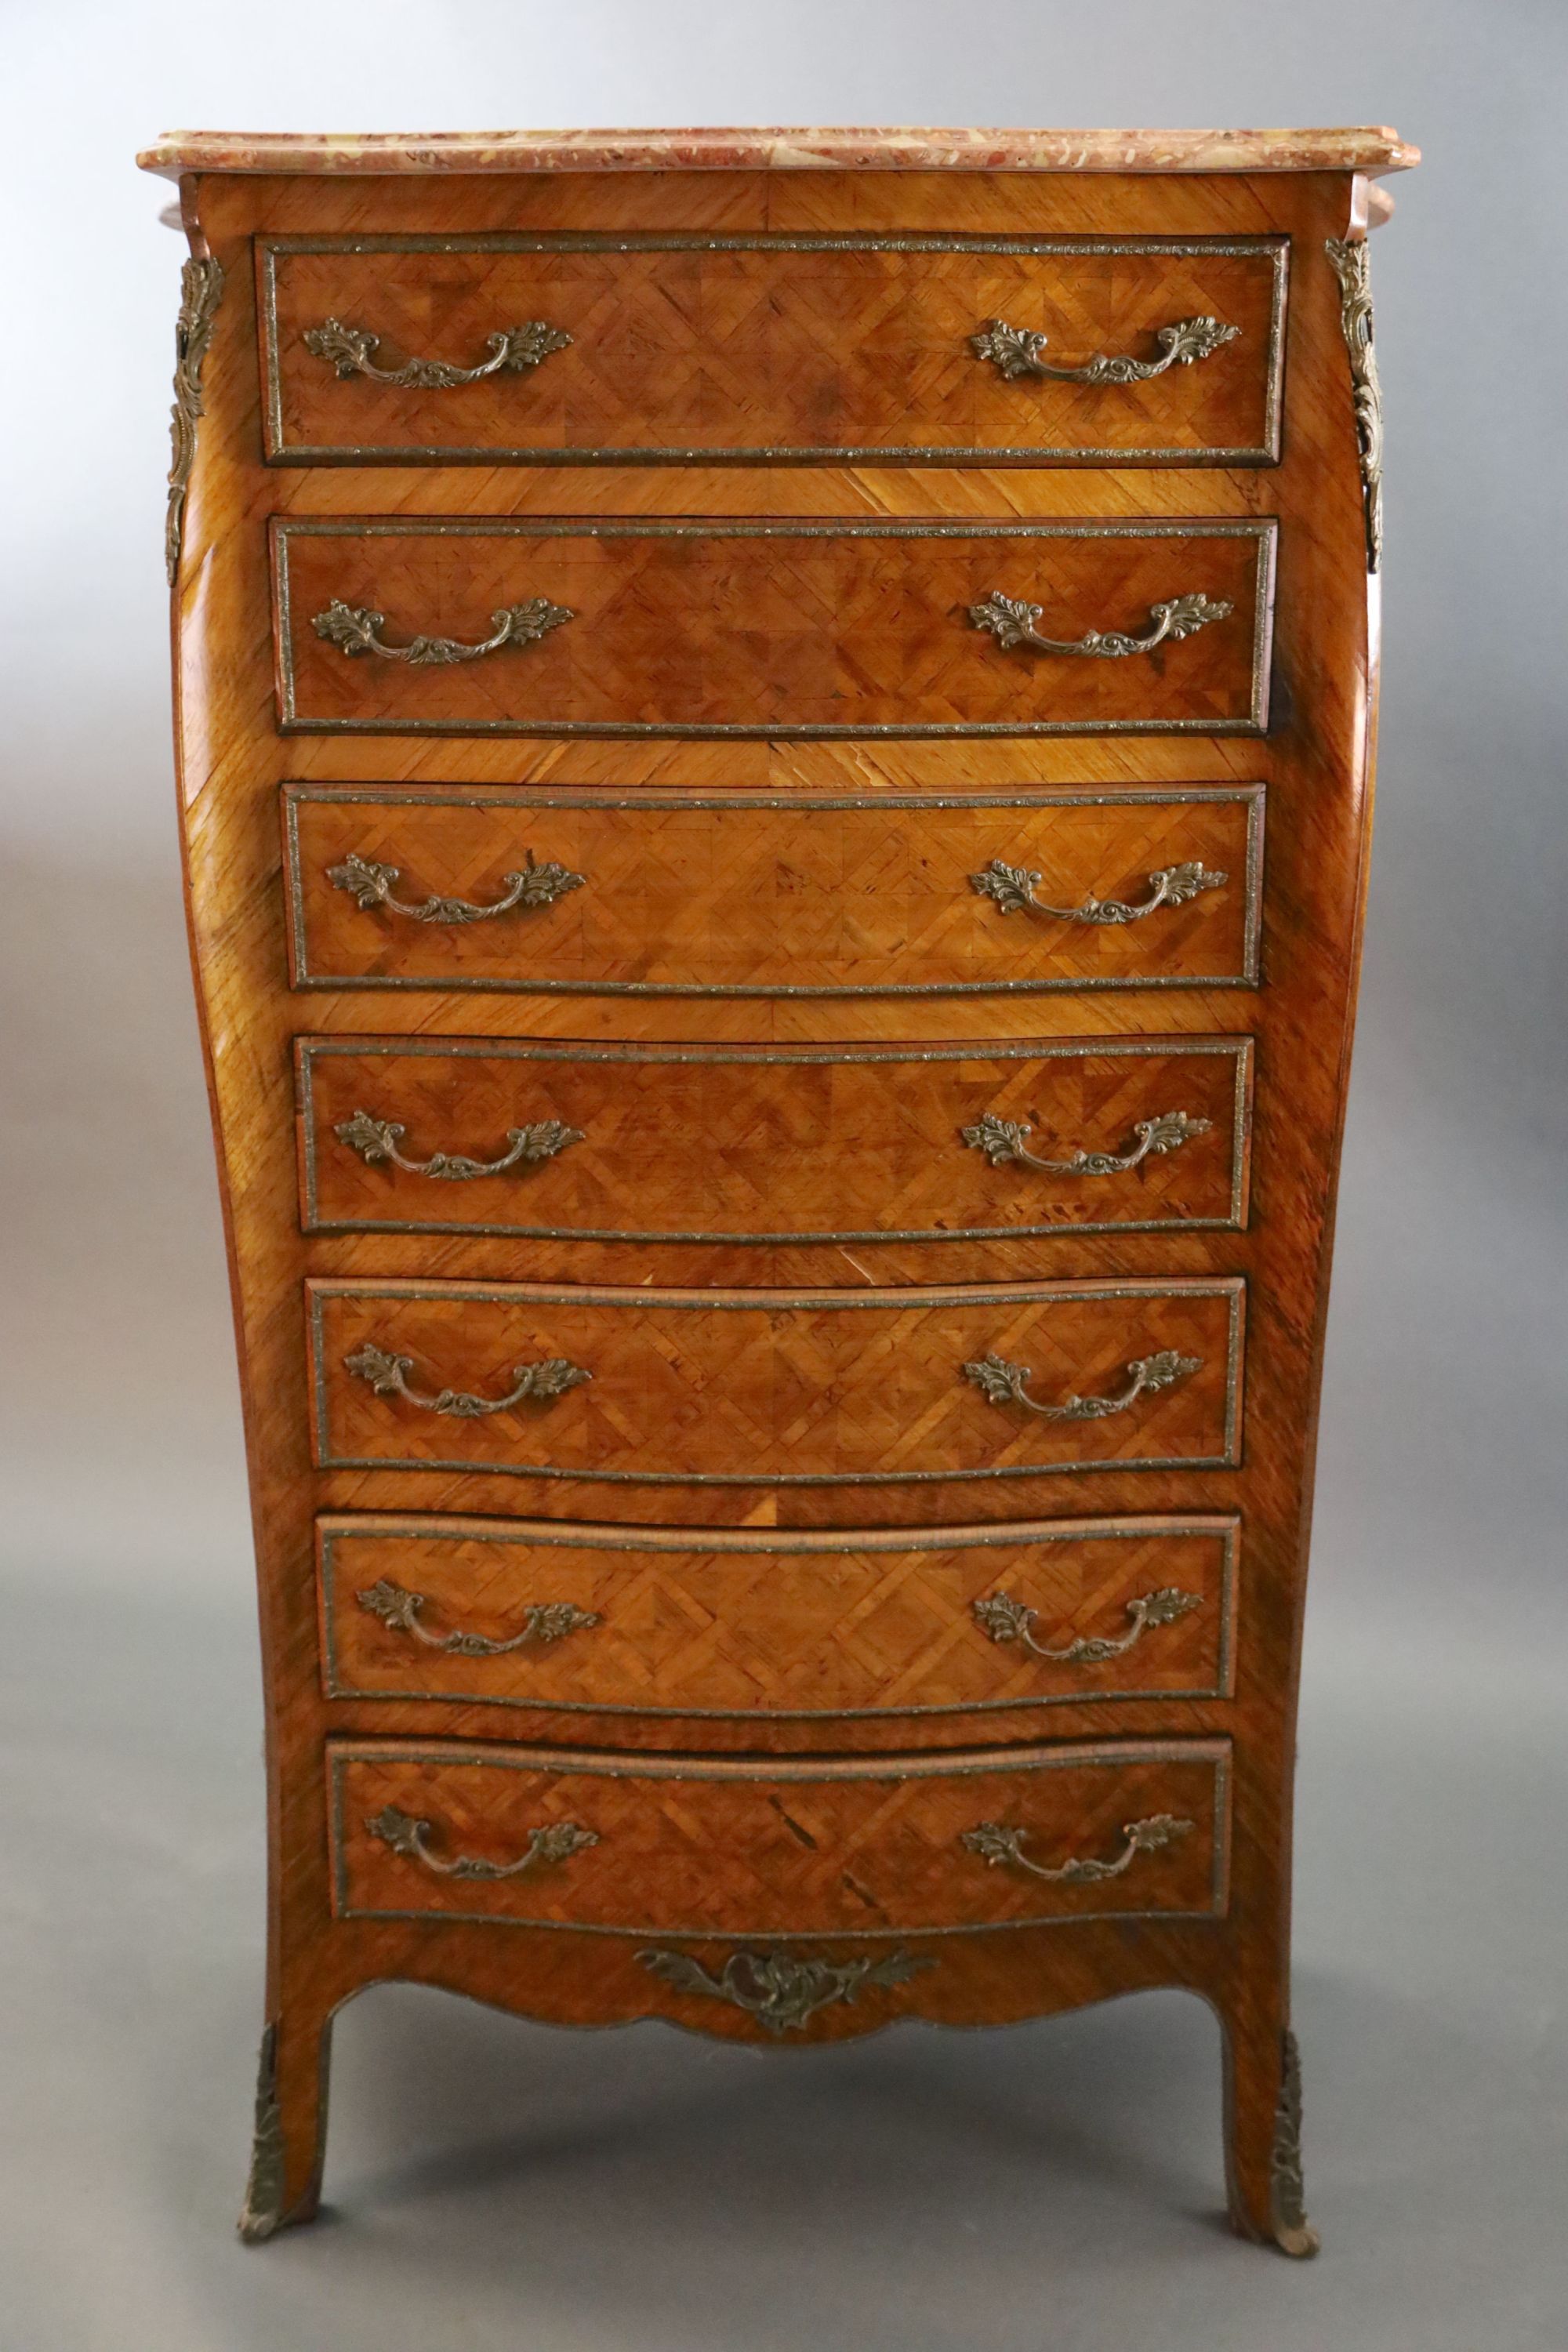 An early 20th century French Louis XVI style parquetry semanier, W.2ft 9in. D.1ft 5in. H.4ft 5in.